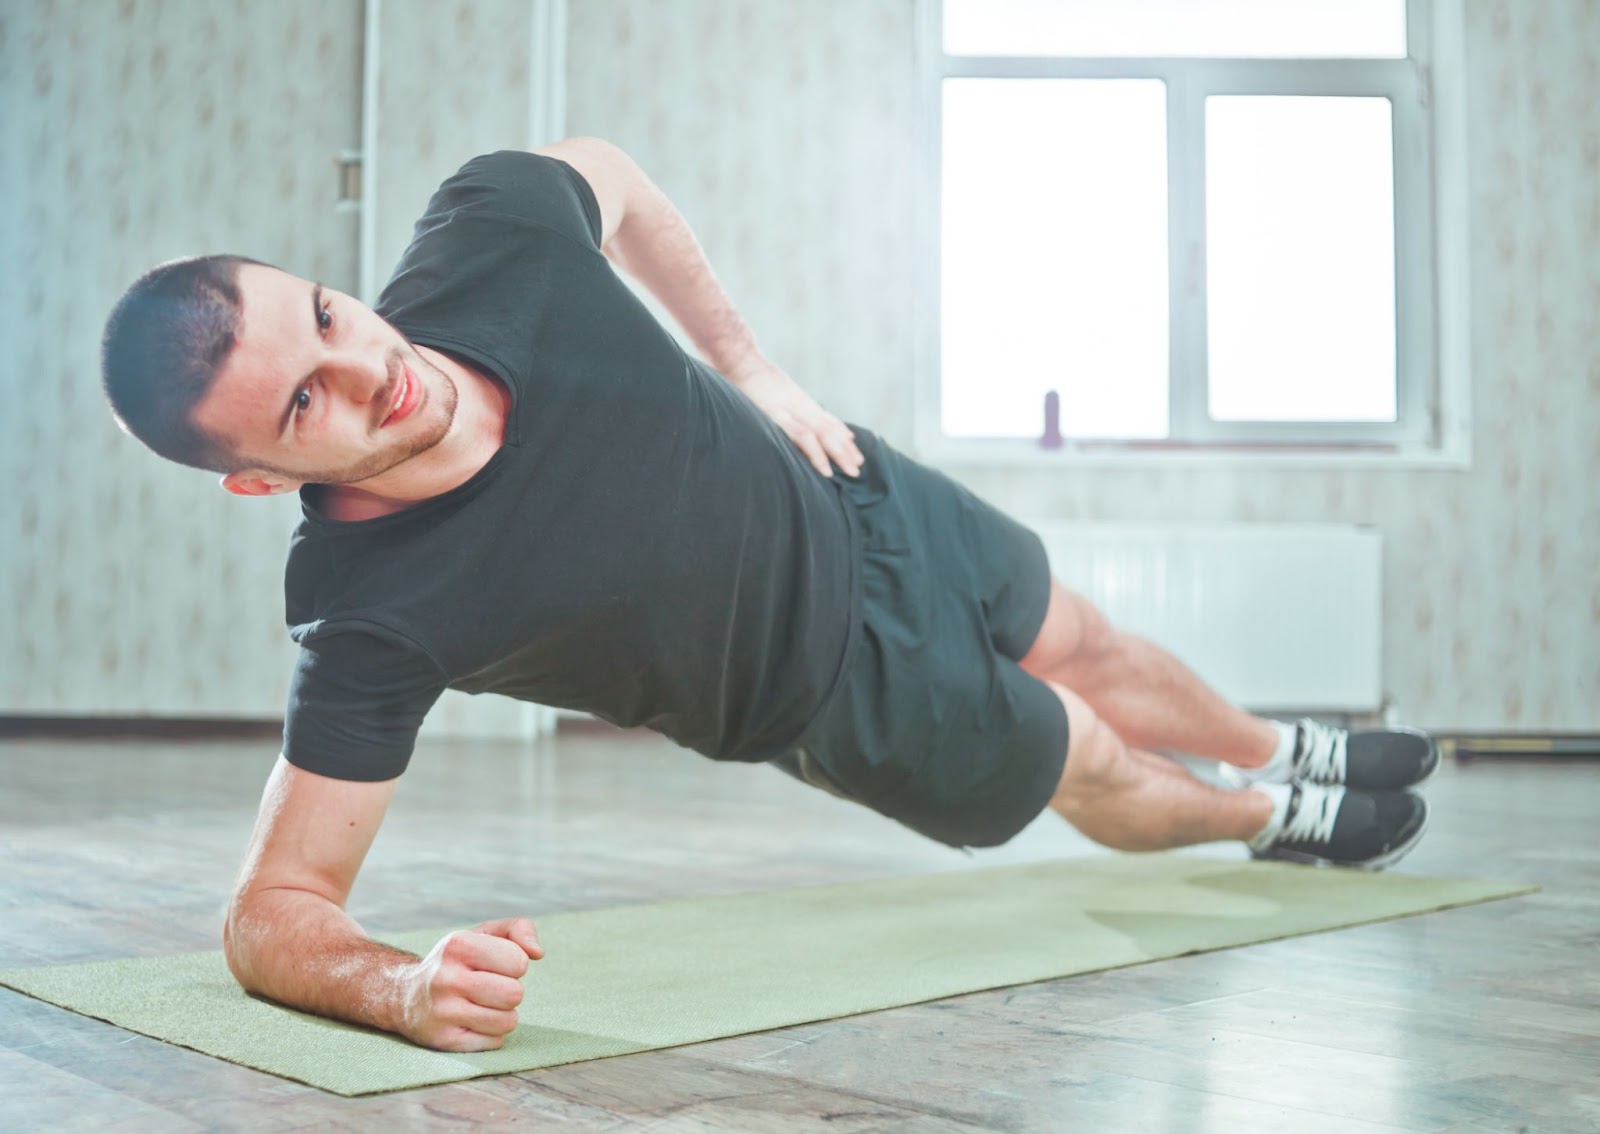 Man performing side plank on a workout mat at a gym.